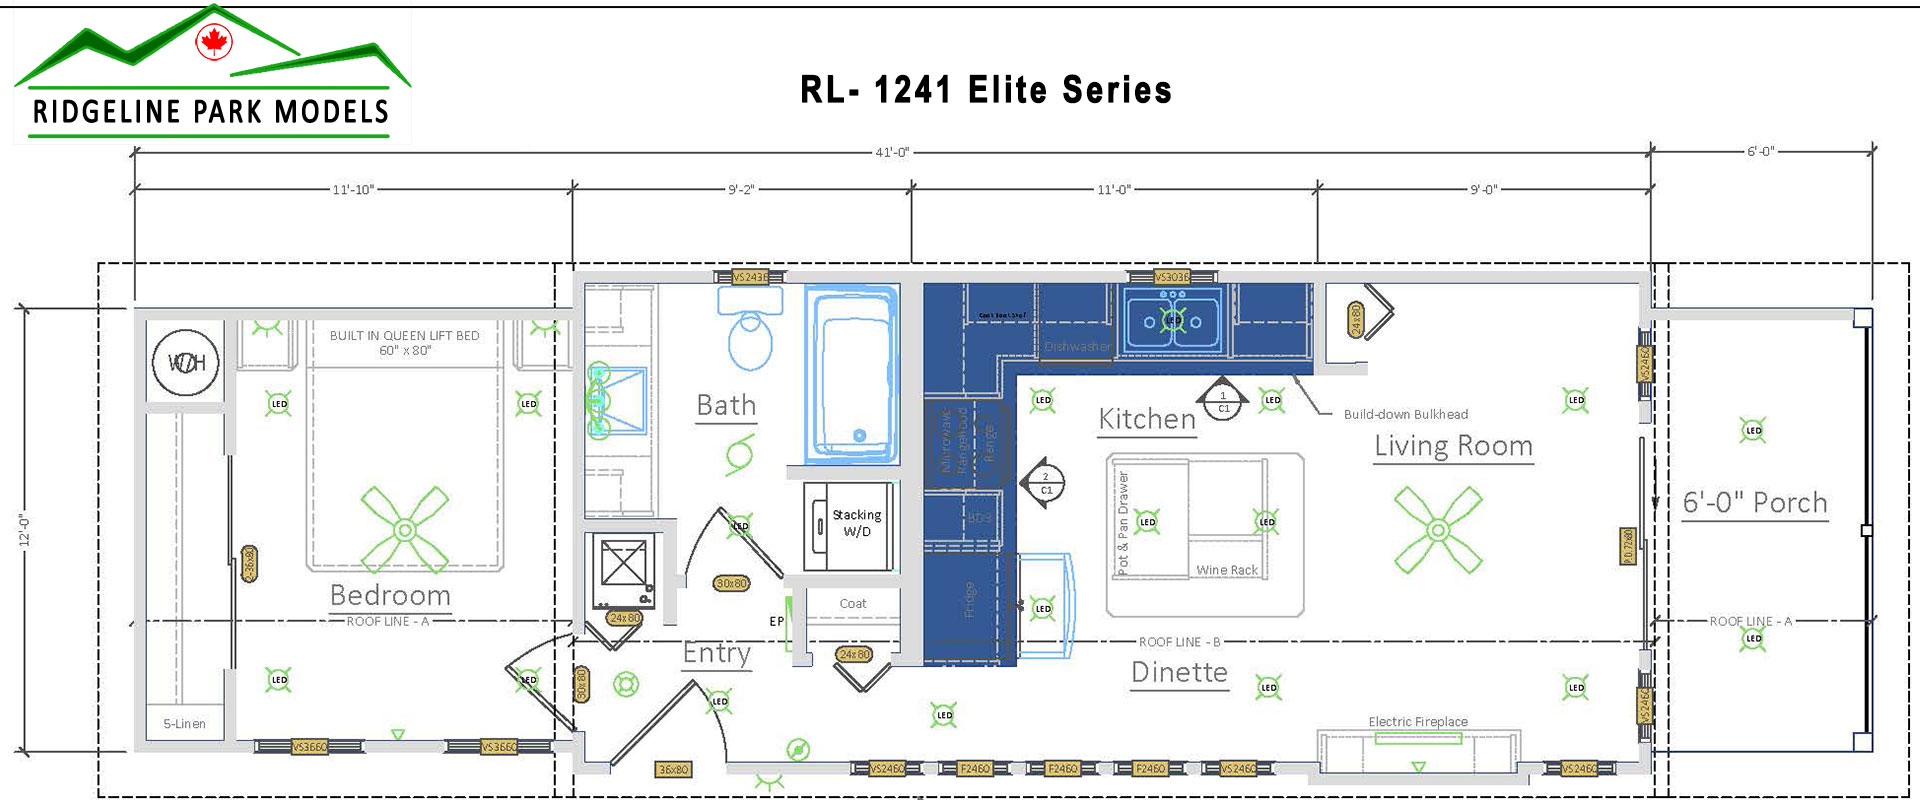 Plan RL-1241 Elite Series from Ridgeline Park Models, serving the Okanagan Valley and all British Columbia locations.